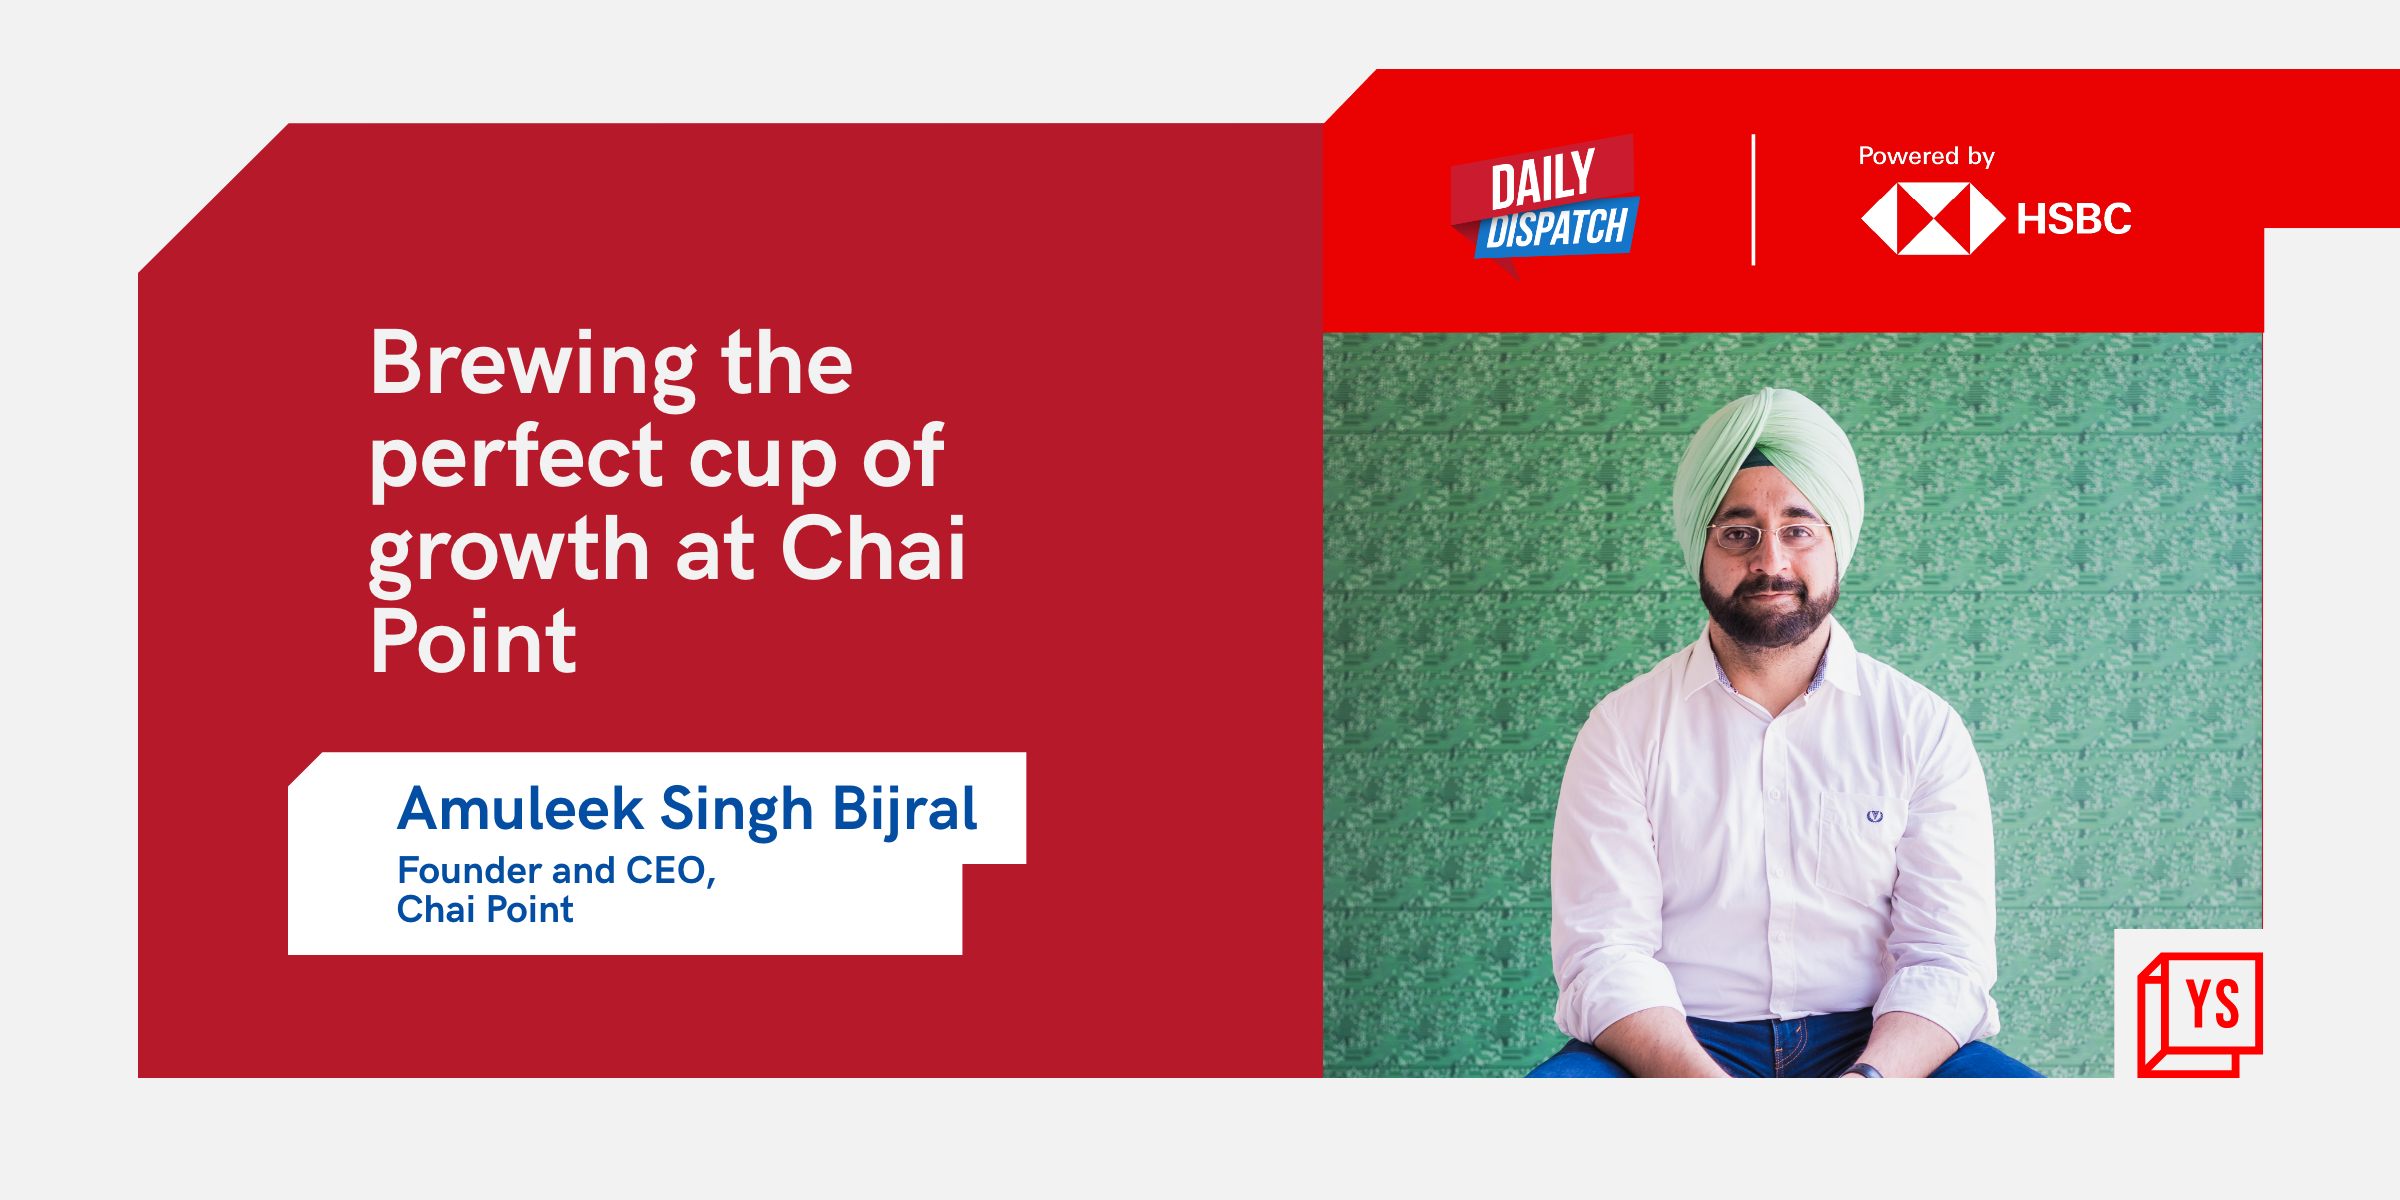 Chai Point betting high on expansion, growth to scale its beverage business